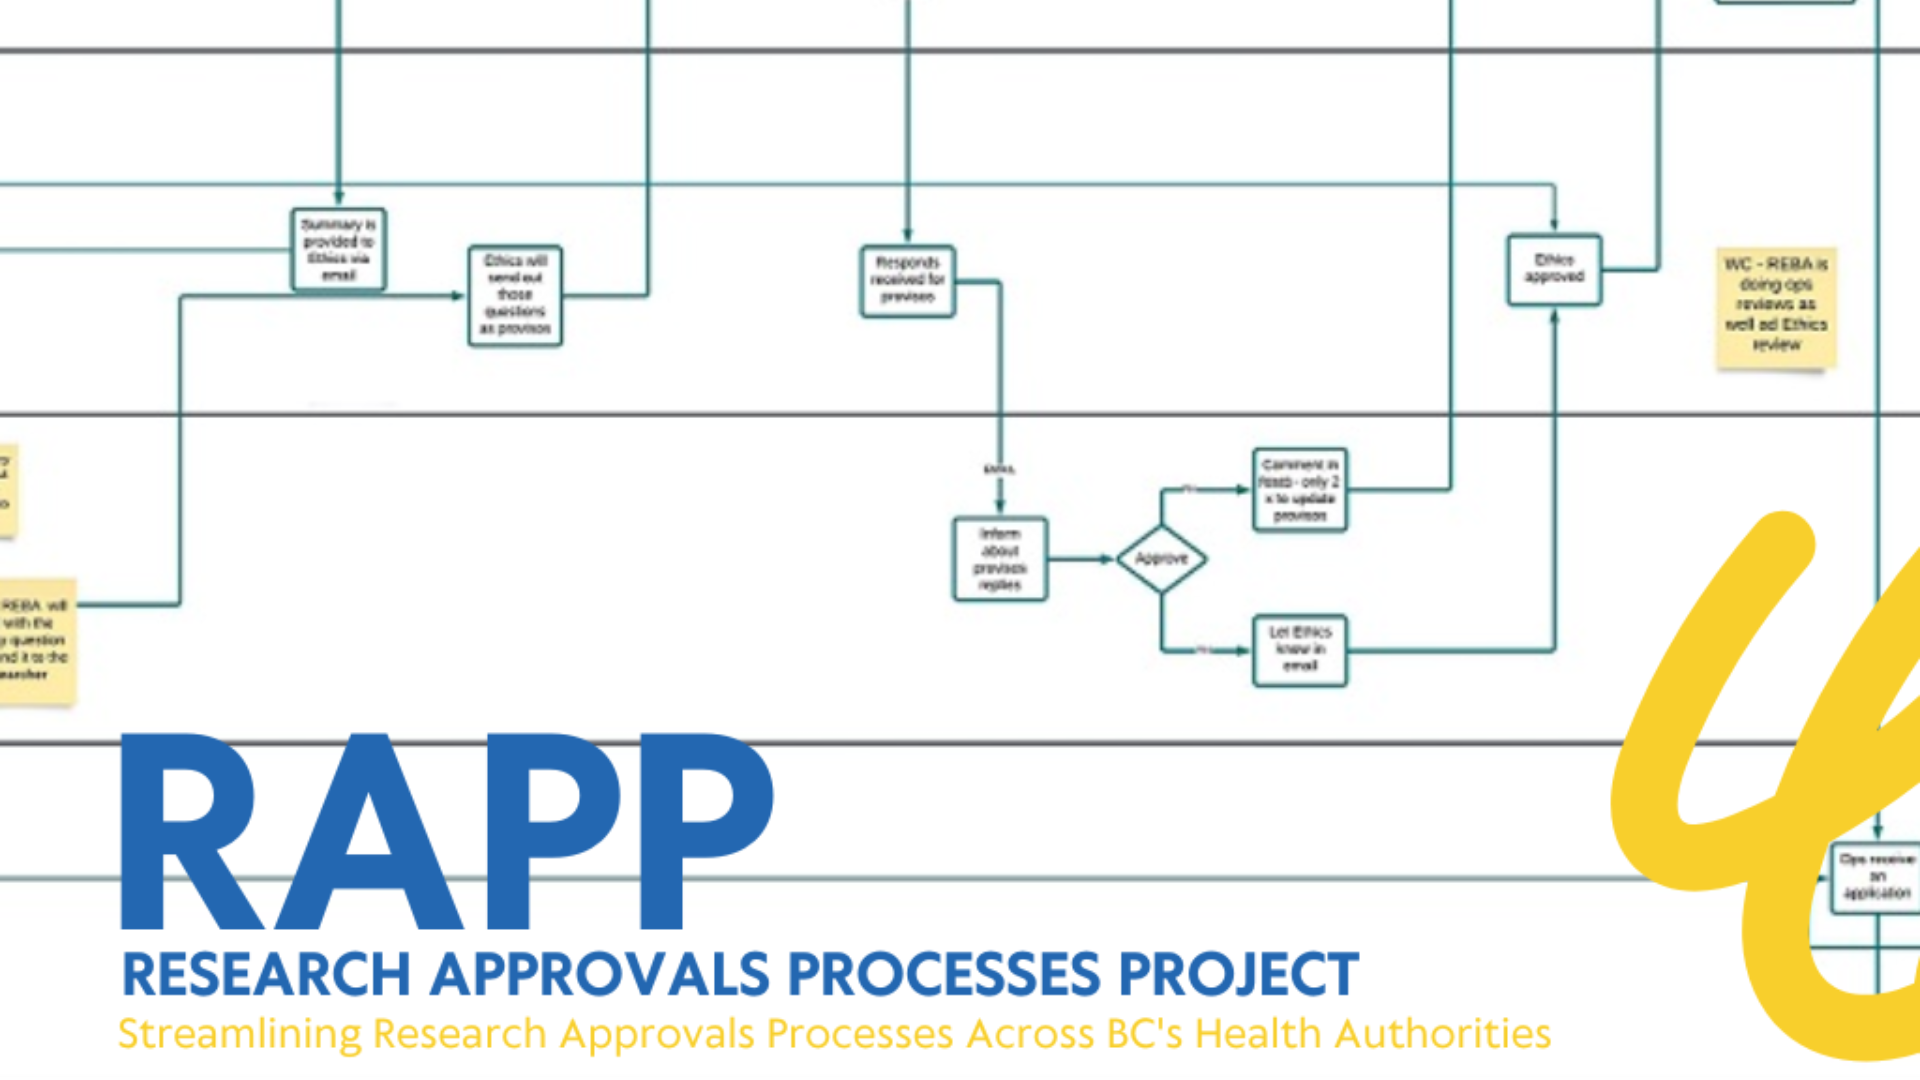 Research Approval Processes Project’s (RAPP) Early Insights from Process Mapping